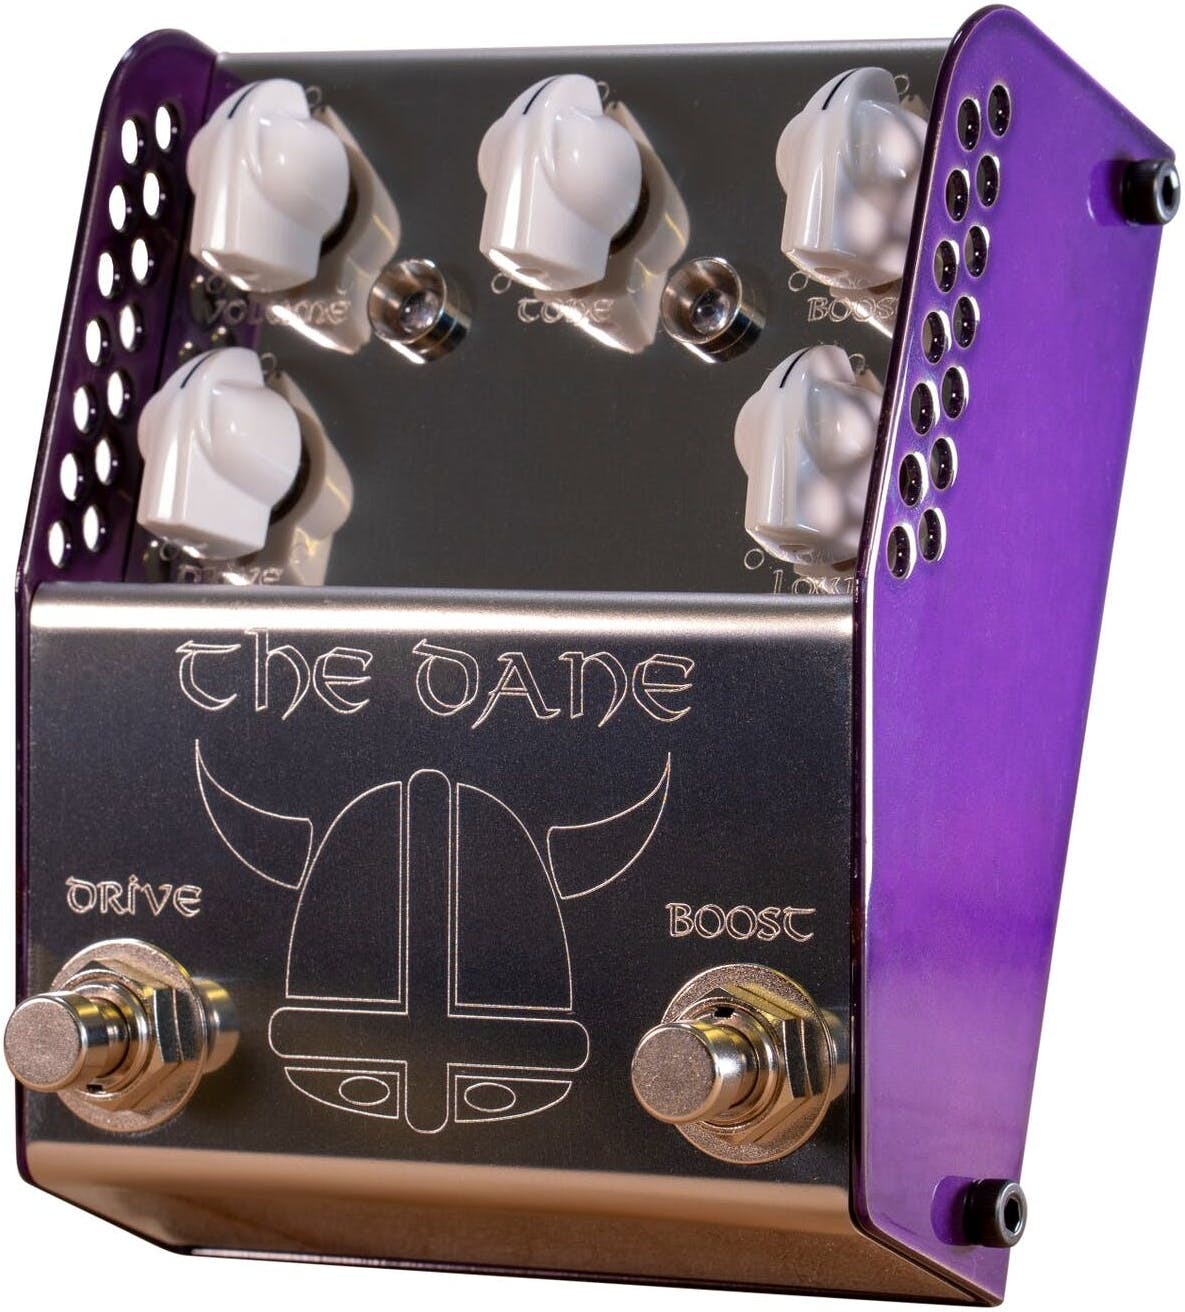 Thorpyfx The Dane Overdrive Boost - Overdrive, distortion & fuzz effect pedal - Main picture